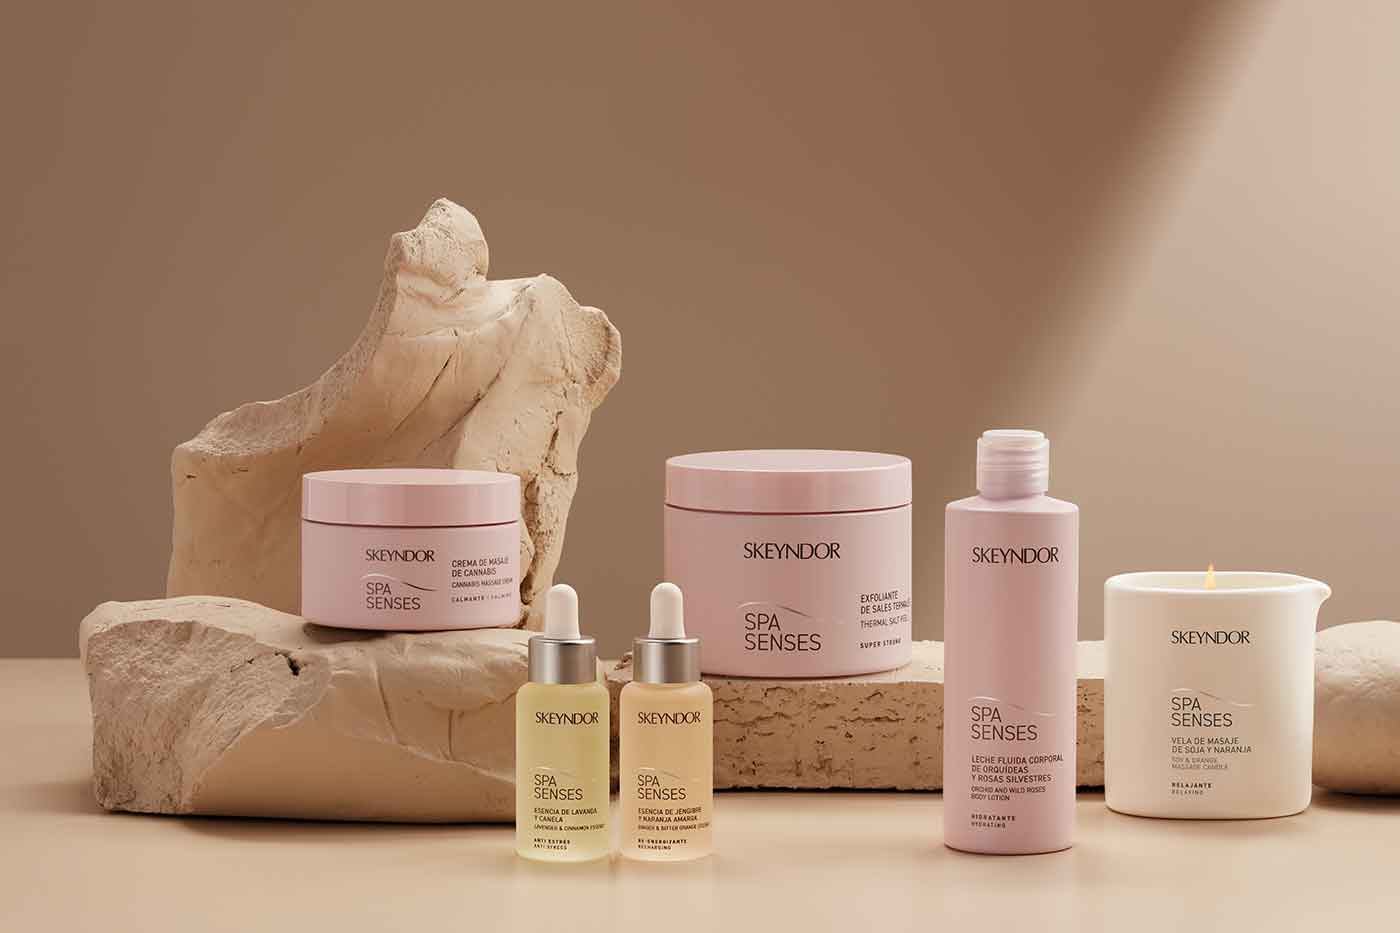 Skeyndor launches a nature-inspired SPA range